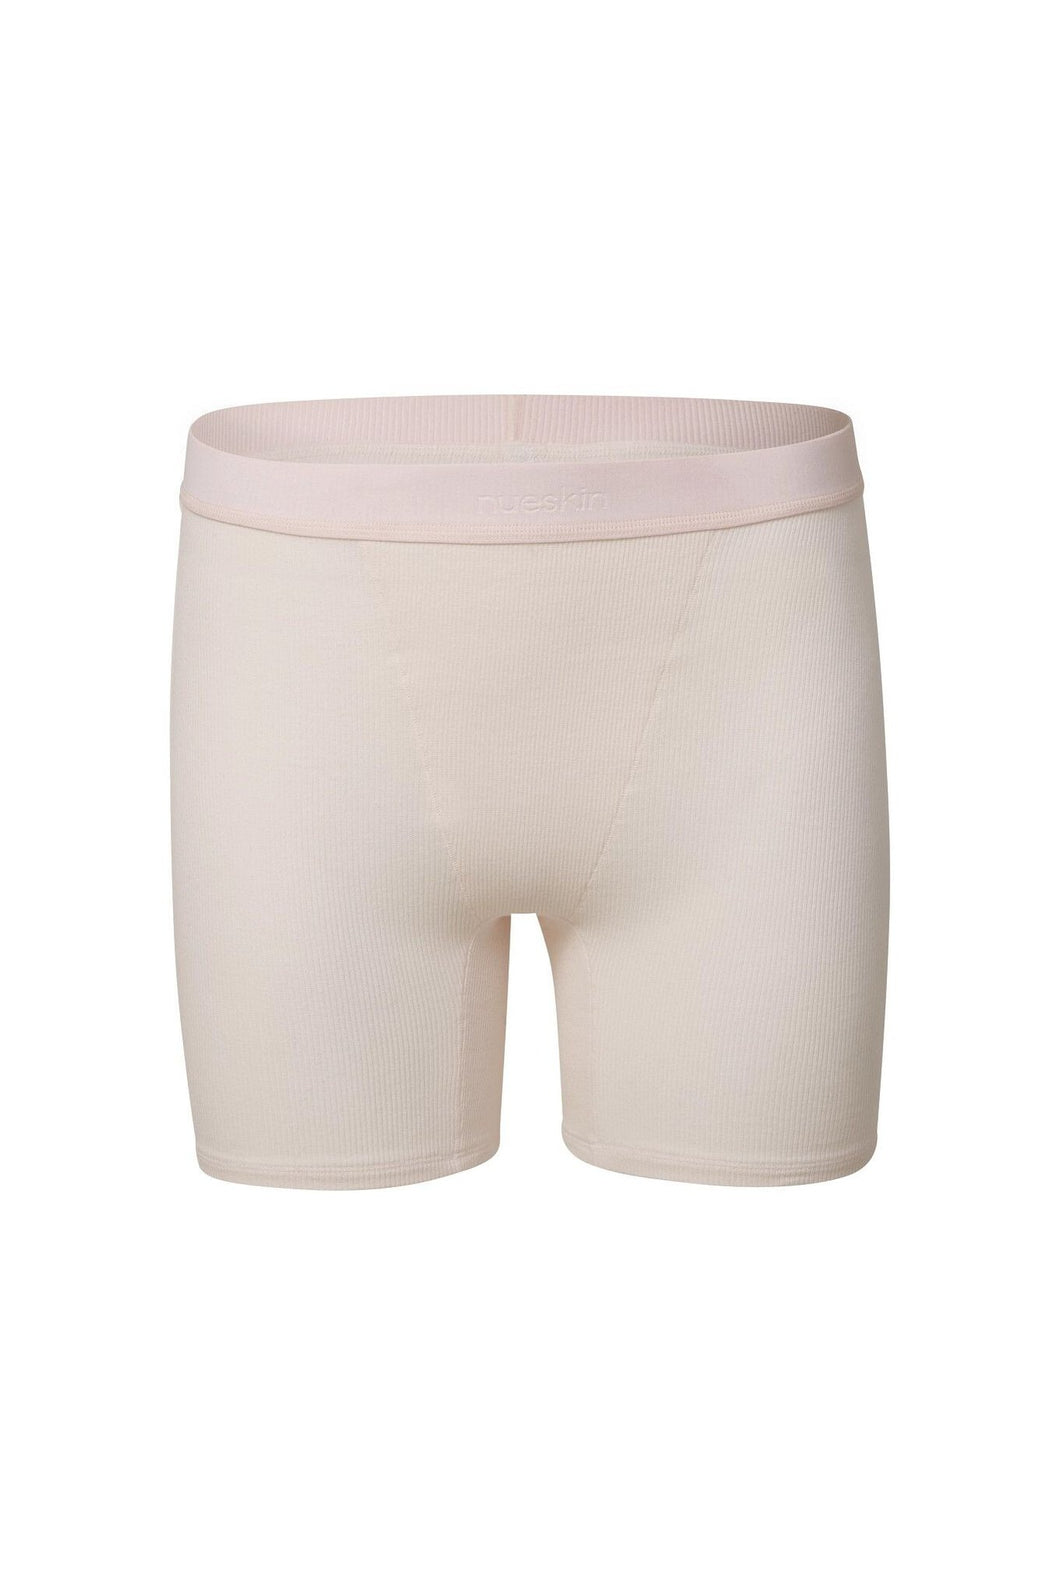 nueskin Hena Rib Cotton Shorts in color Powder Puff and shape shortie